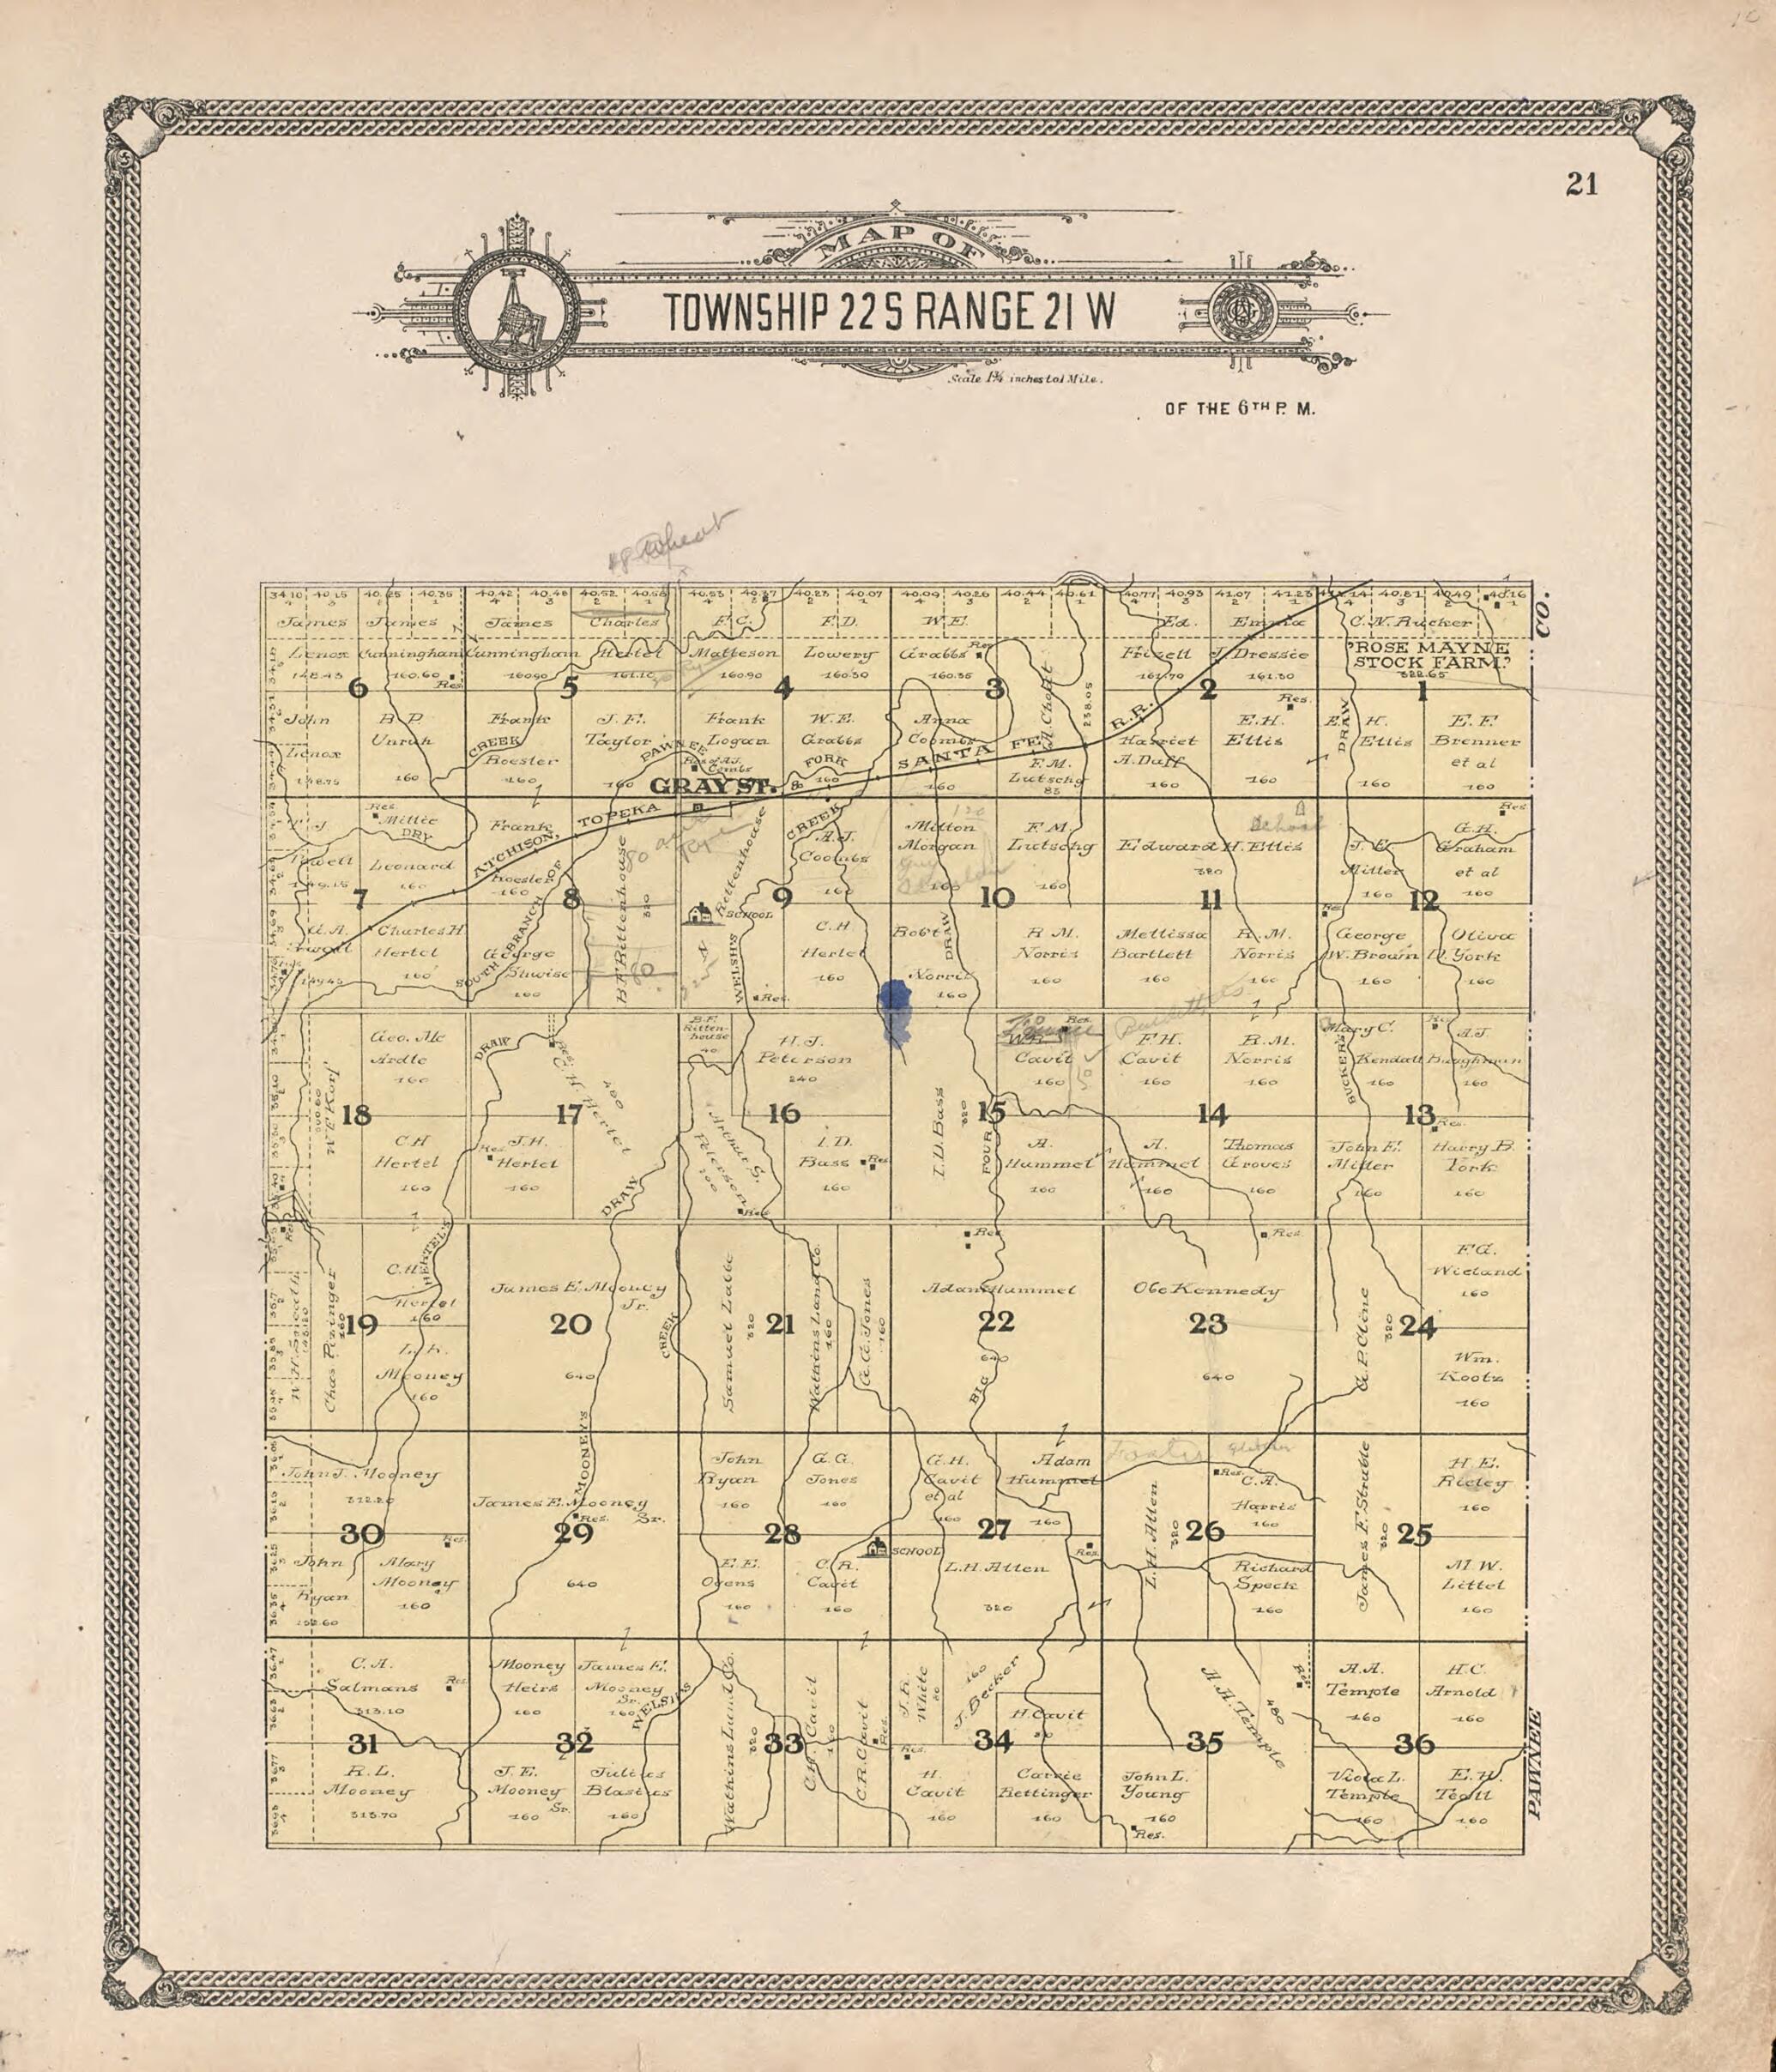 This old map of Map of Township 22 S Range 21 W from Standard Atlas of Hodgeman County, Kansas from 1907 was created by  Geo. A. Ogle &amp; Co in 1907